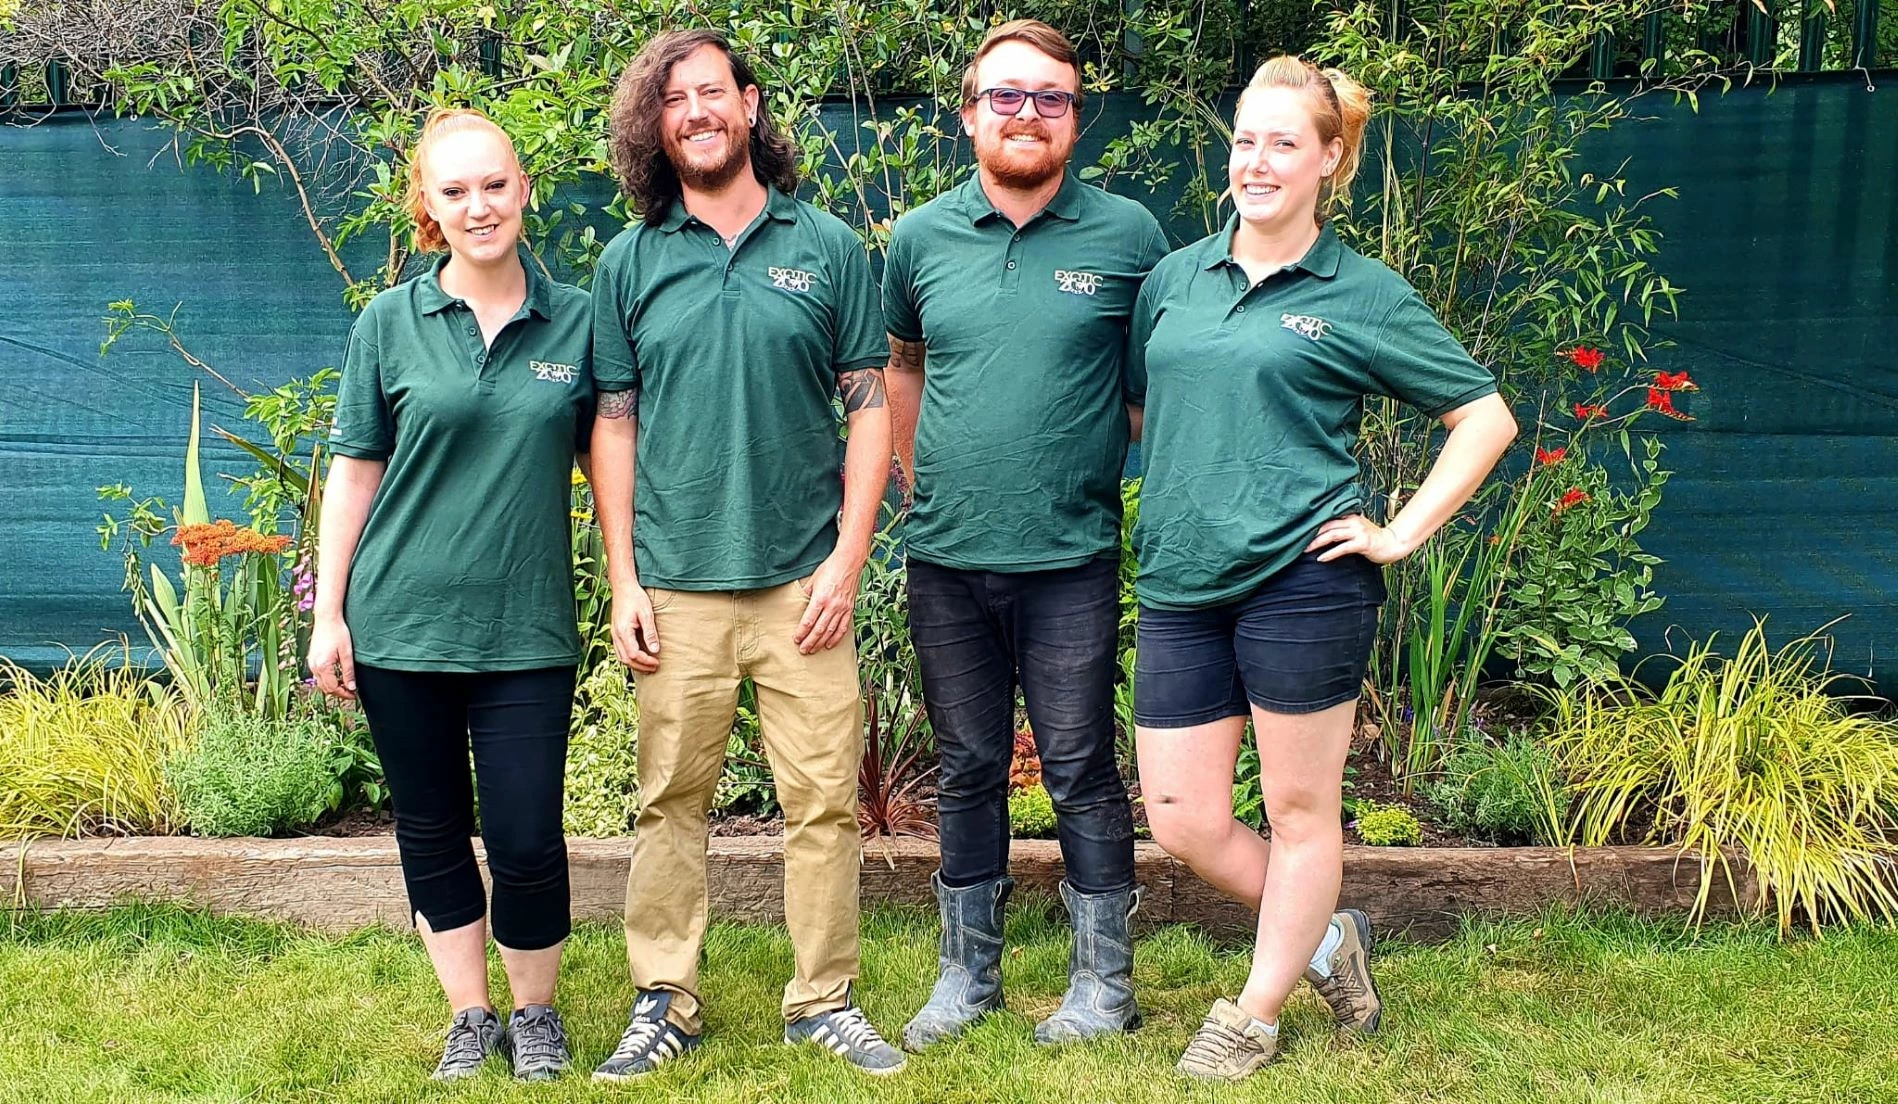 The Exotic Zoo team ready for re-opening in their new uniforms